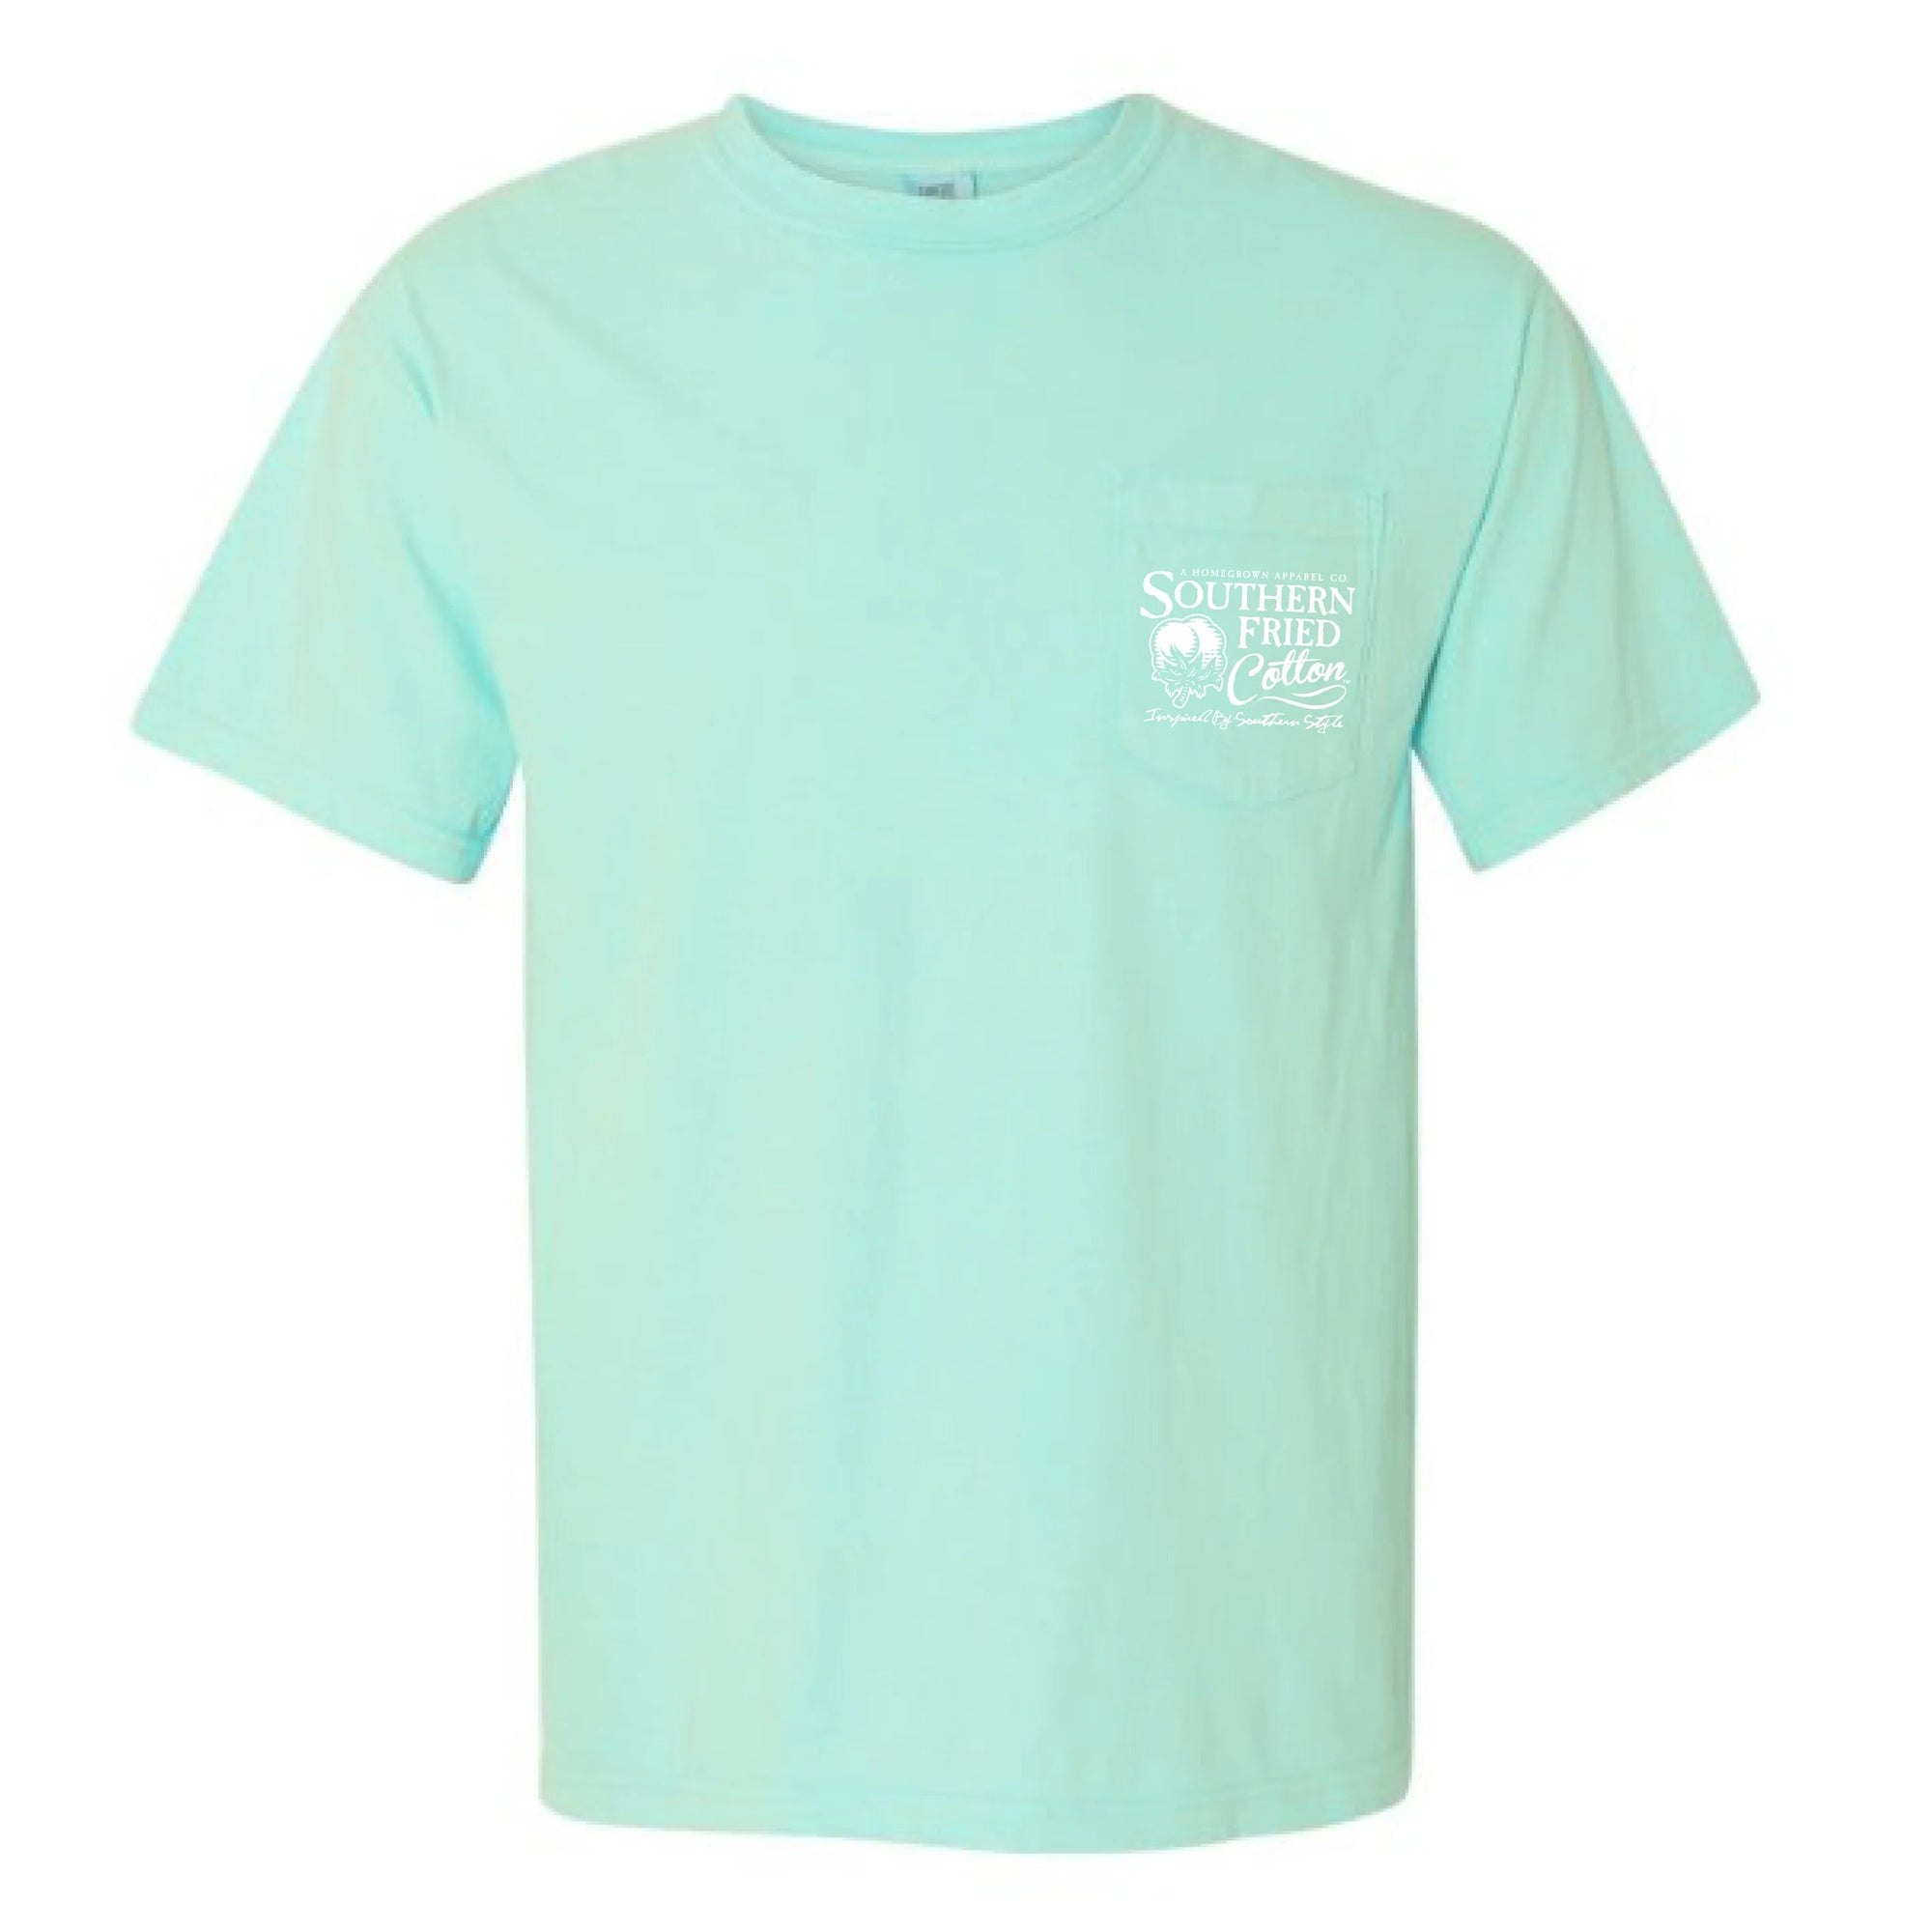 SOUTHERN FRIED COTTON Men's Tees Southern Fried Cotton Off Shore Tee || David's Clothing